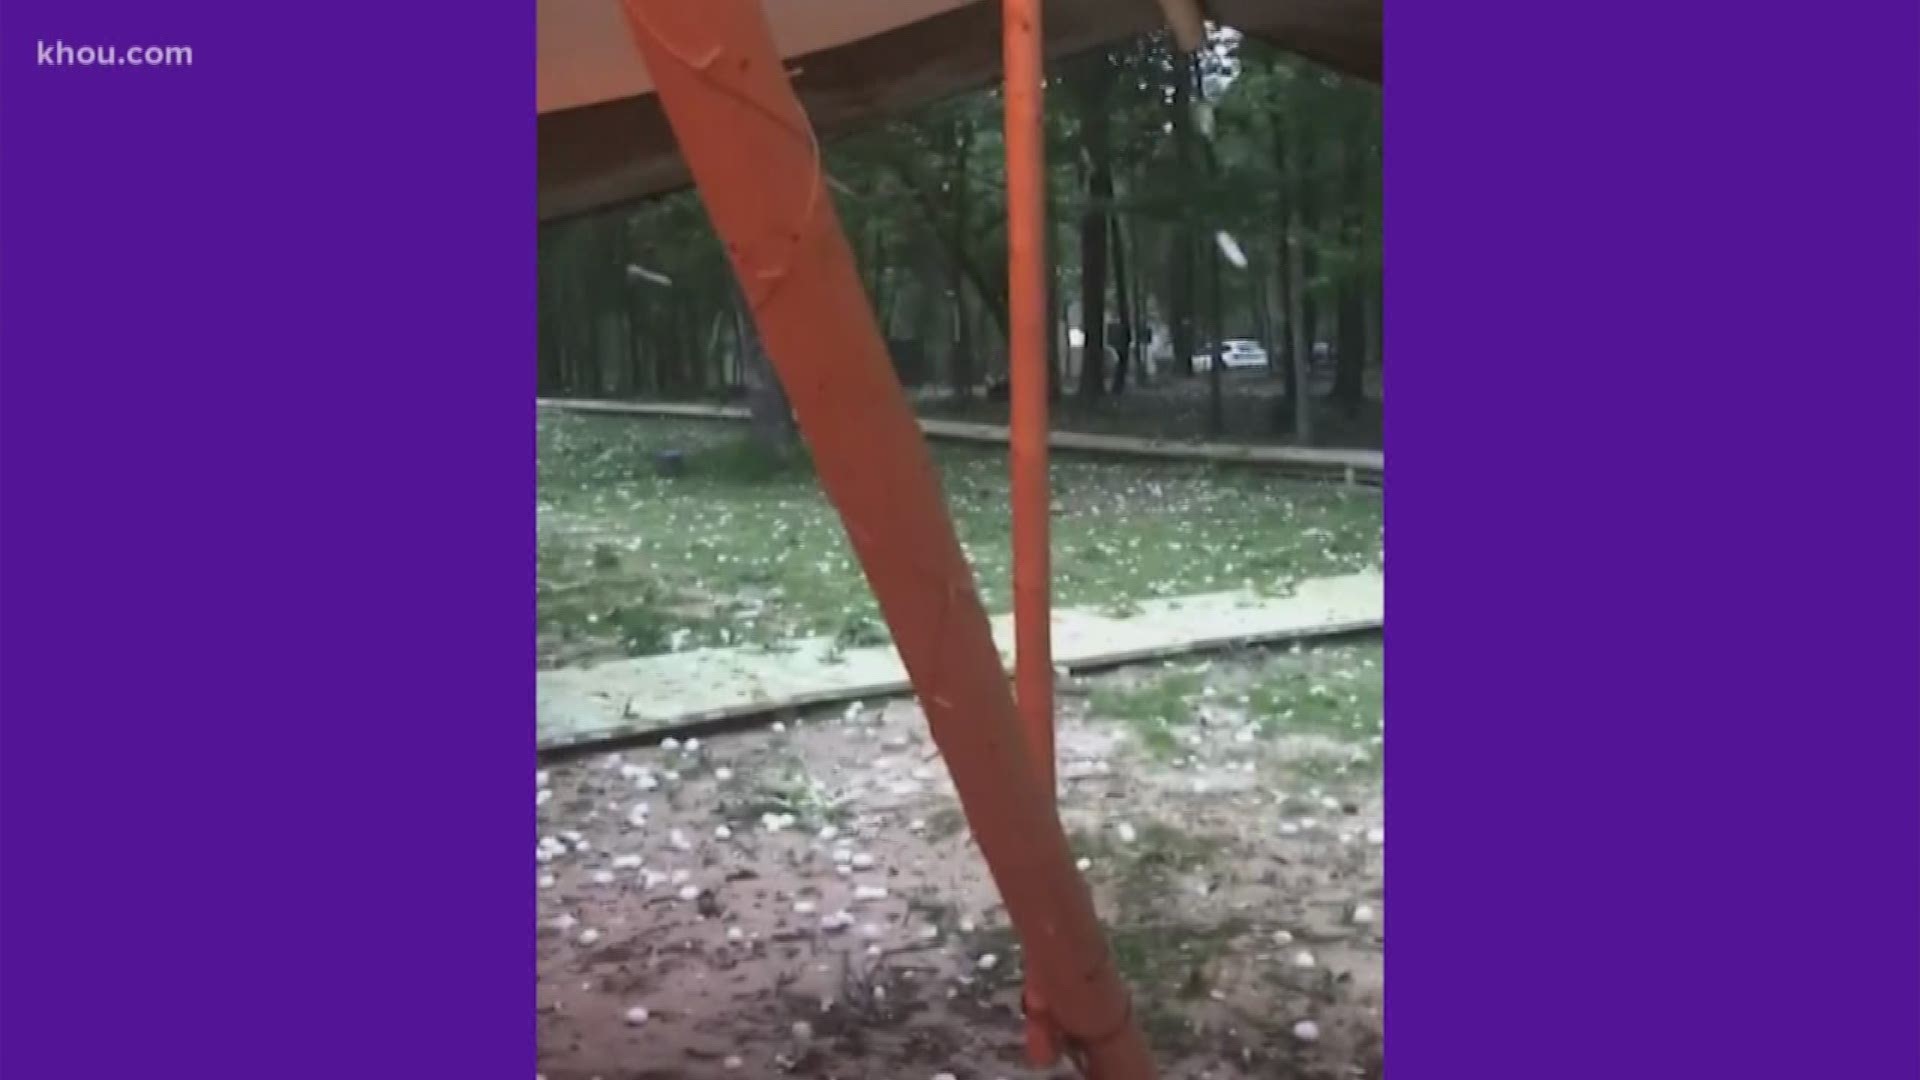 Hail hit Huntsville and Katy Saturday afternoon as storms rolled into southeast Texas.